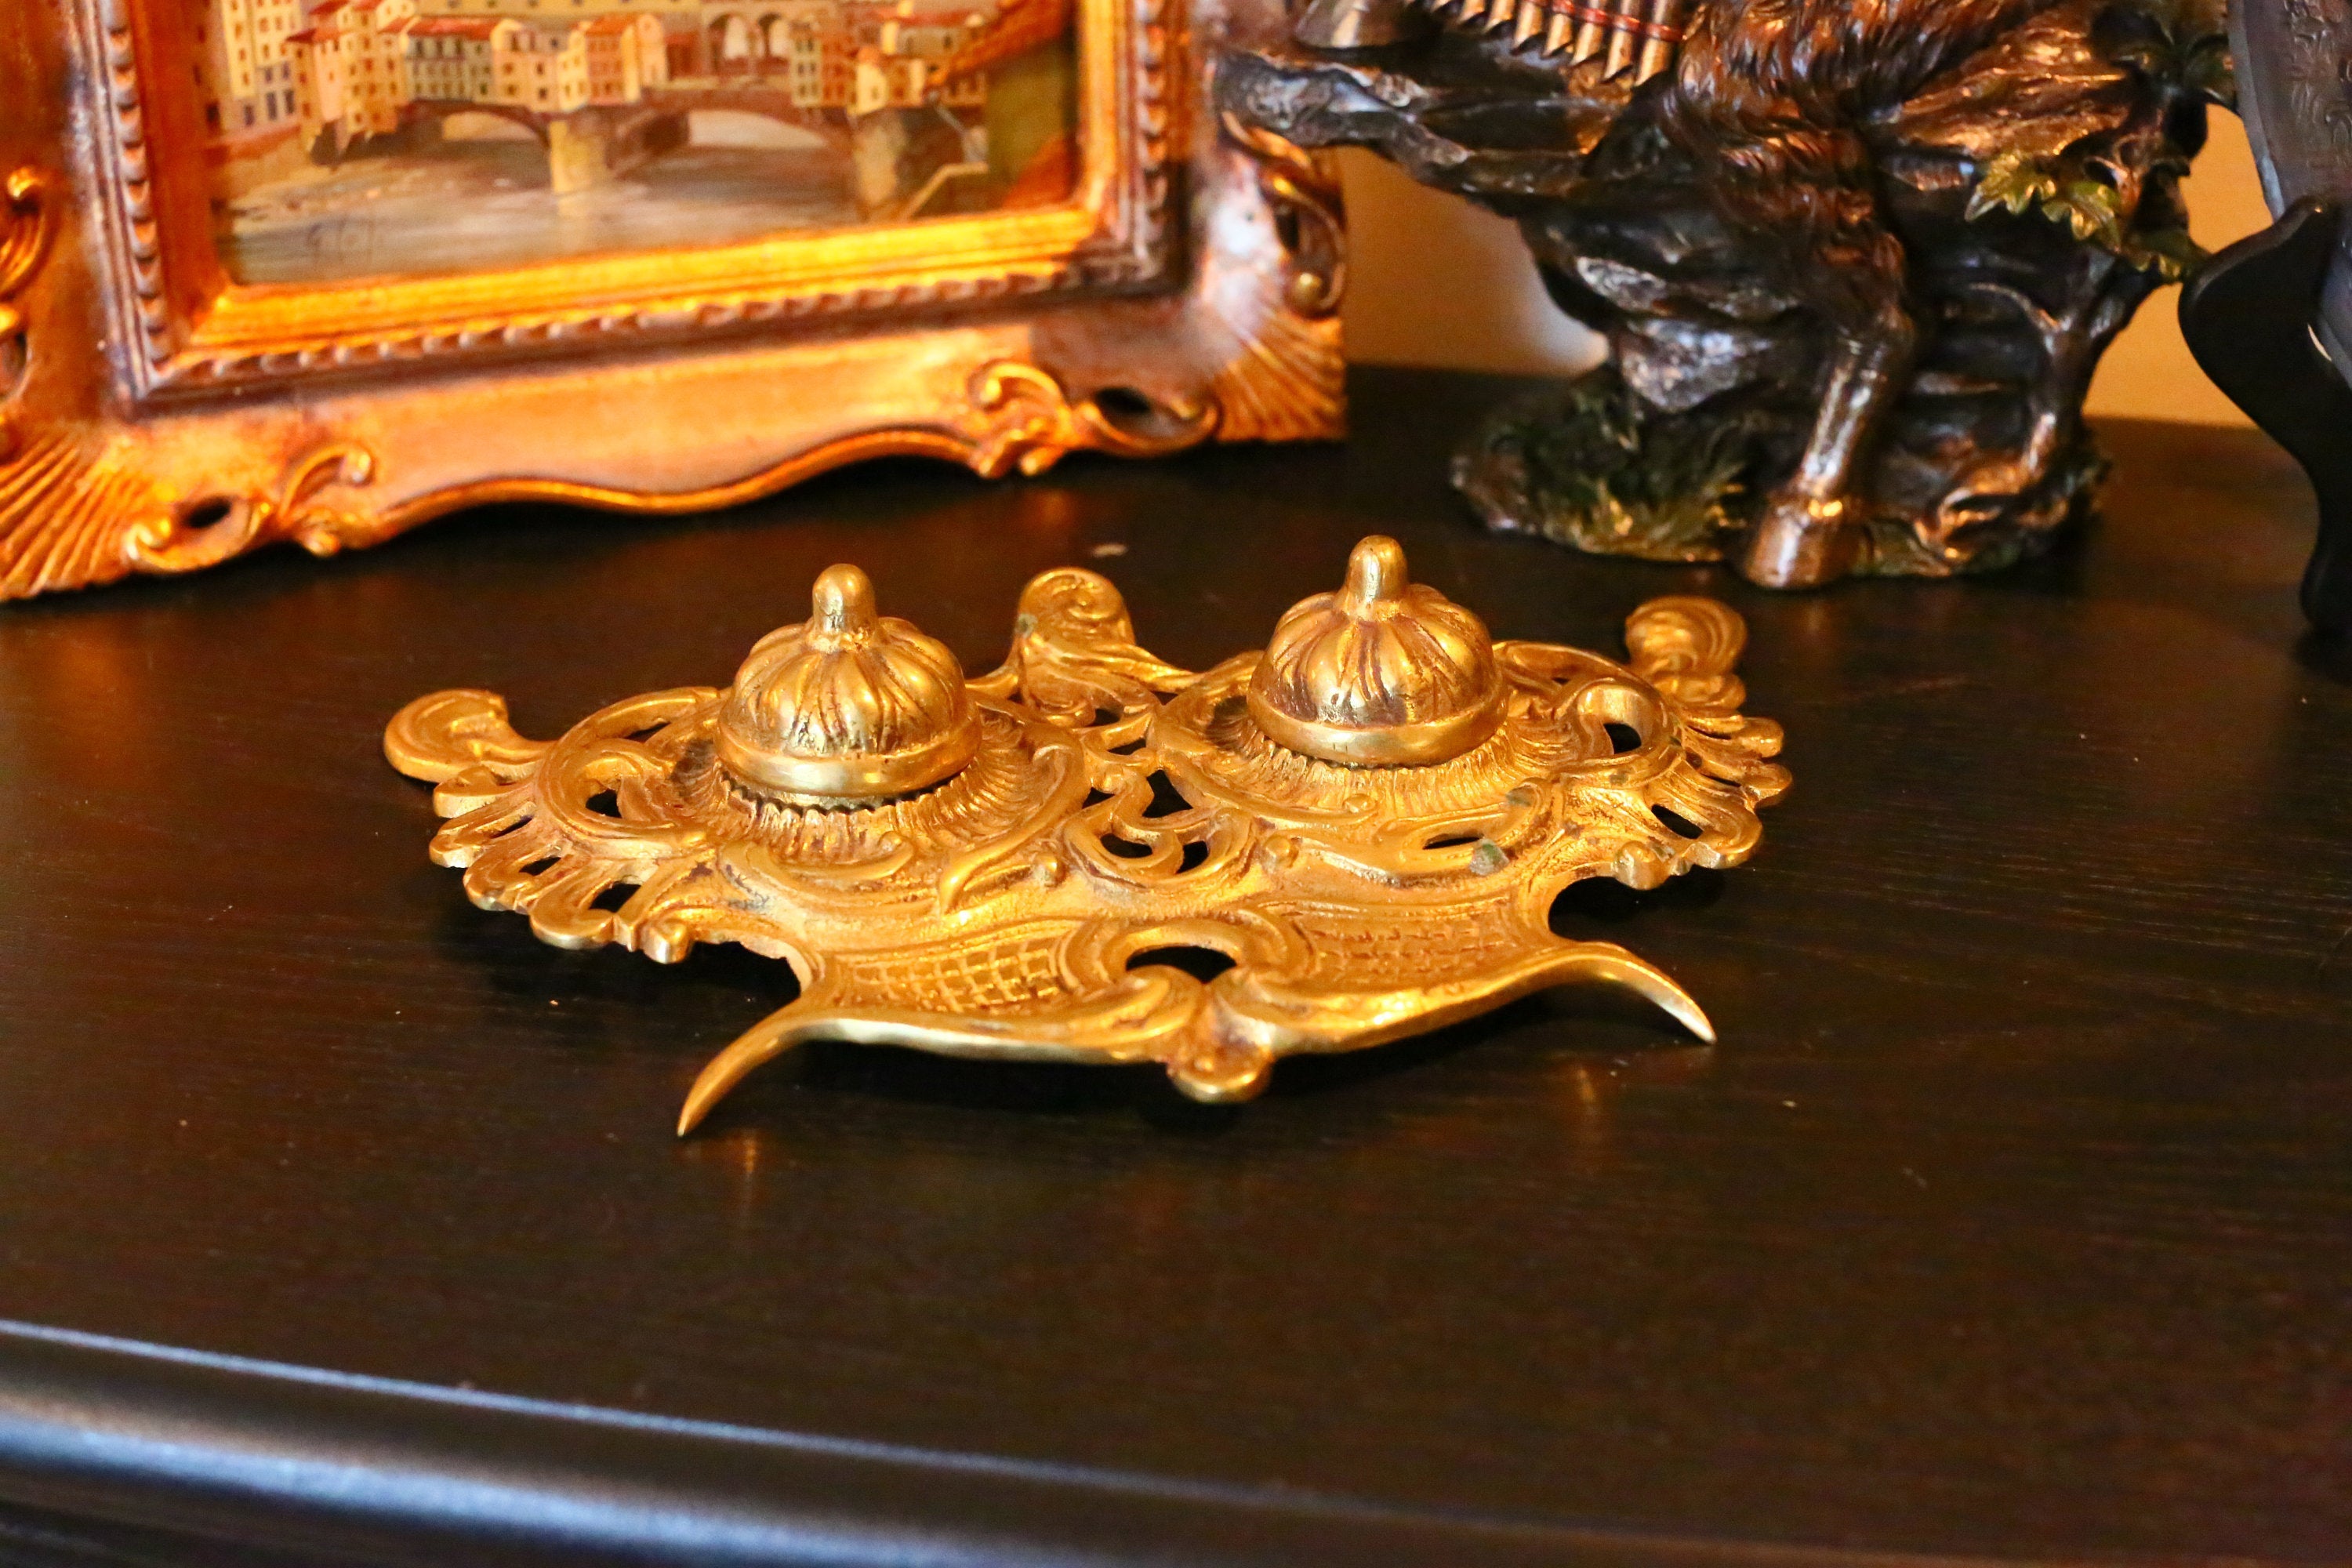 Antique Victorian Brass Inkwell with Double Wells and a Lovely Patina